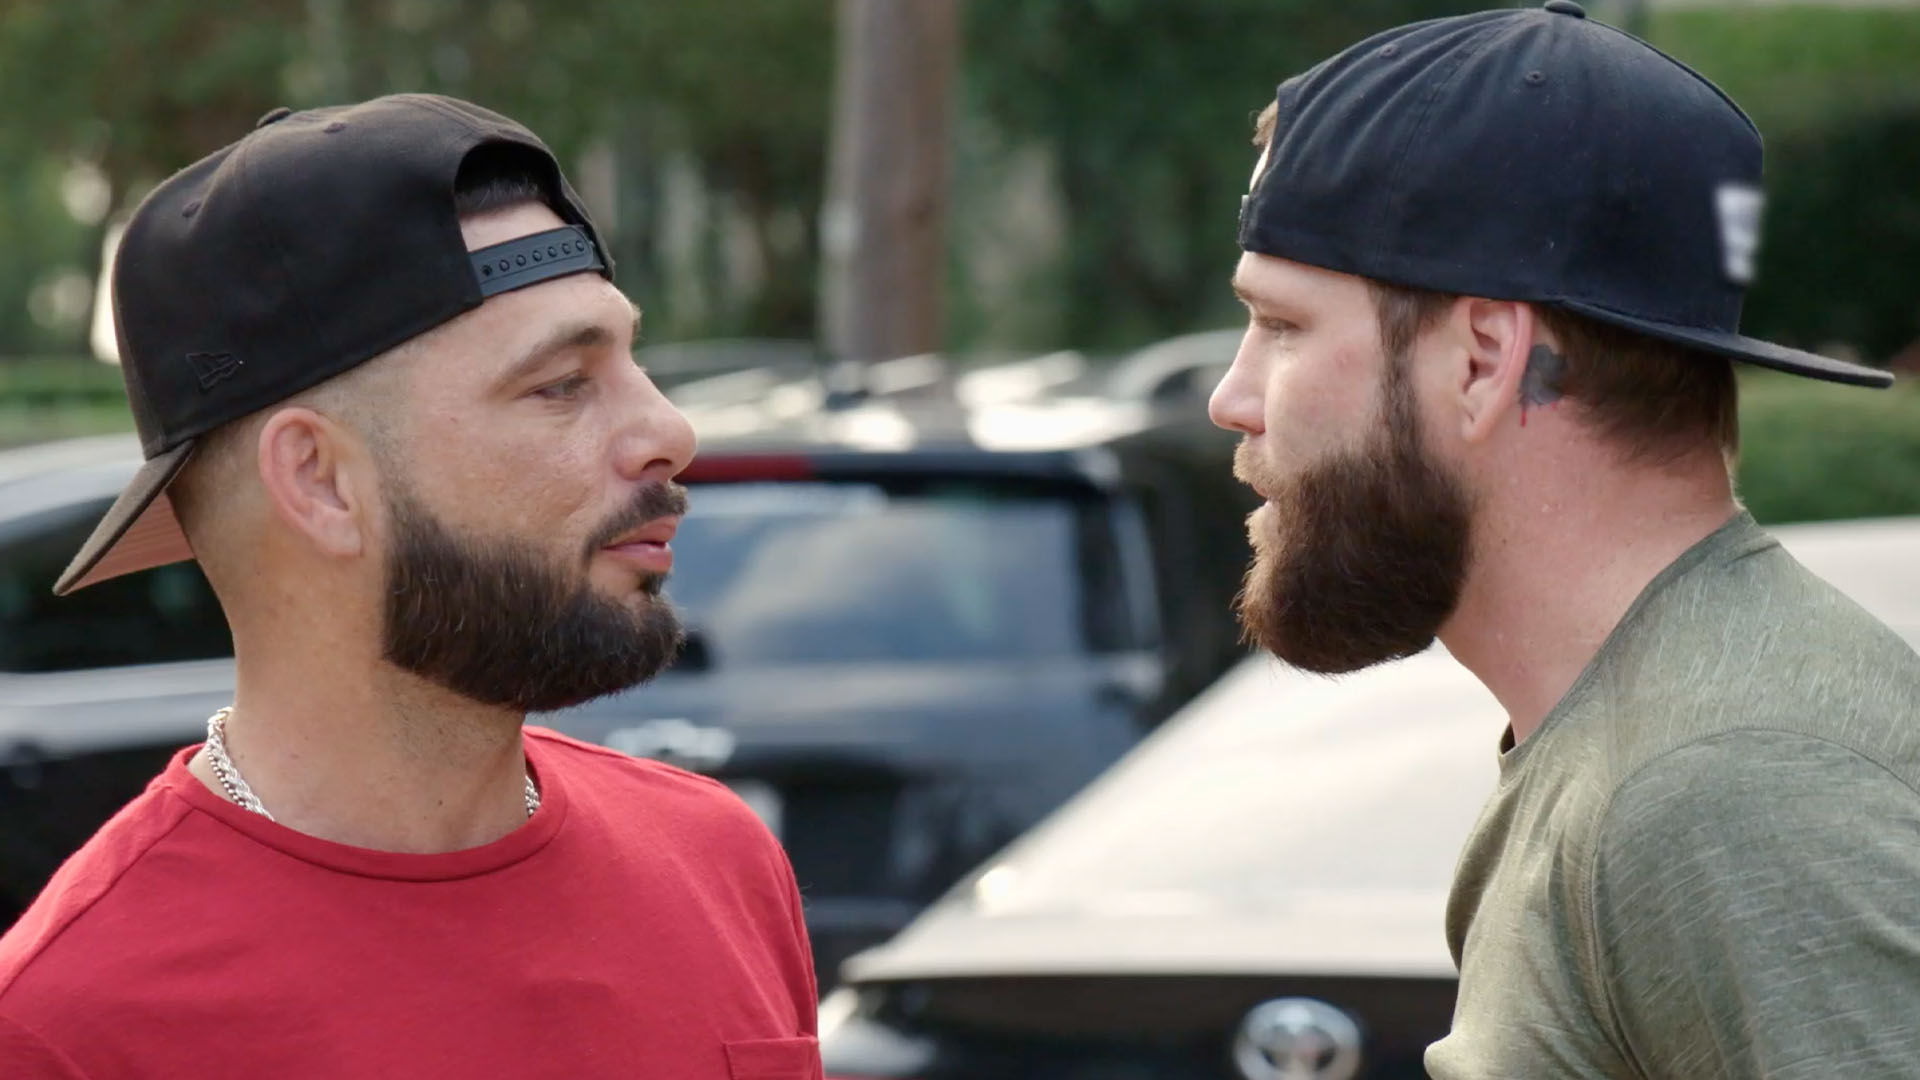 Watch Sneak Peek: Who Won the Fight for Tiffany? | Love After Lockup Video Extras